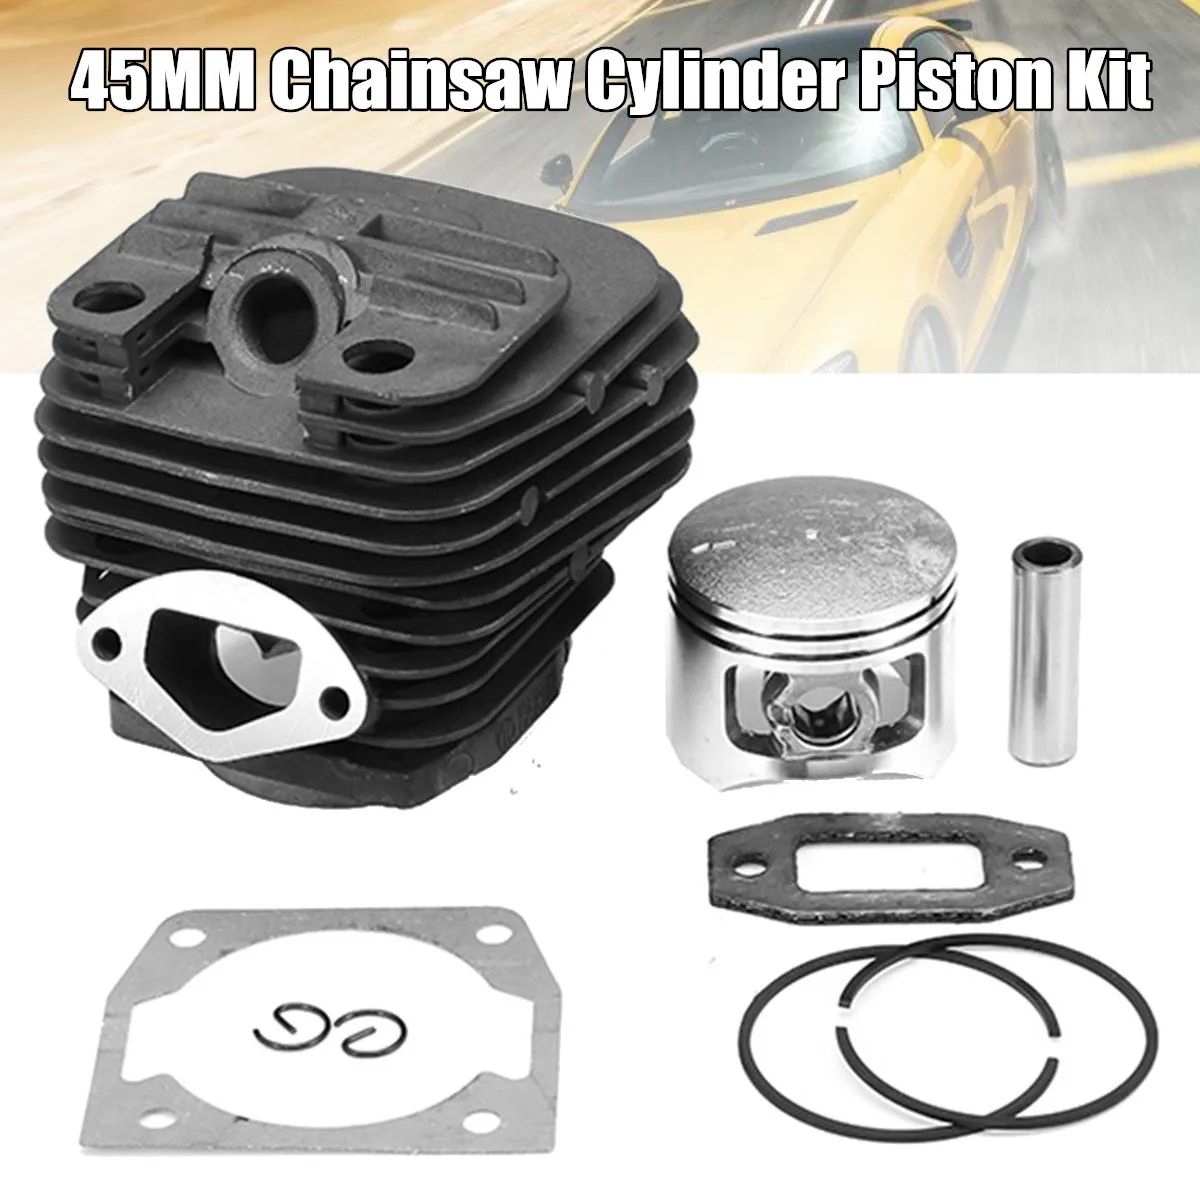 

52cc Chainsaws 45mm Chainsaw Cylinder Piston Kit for 52CC 5200 Chinese Gasoline Chain Saw